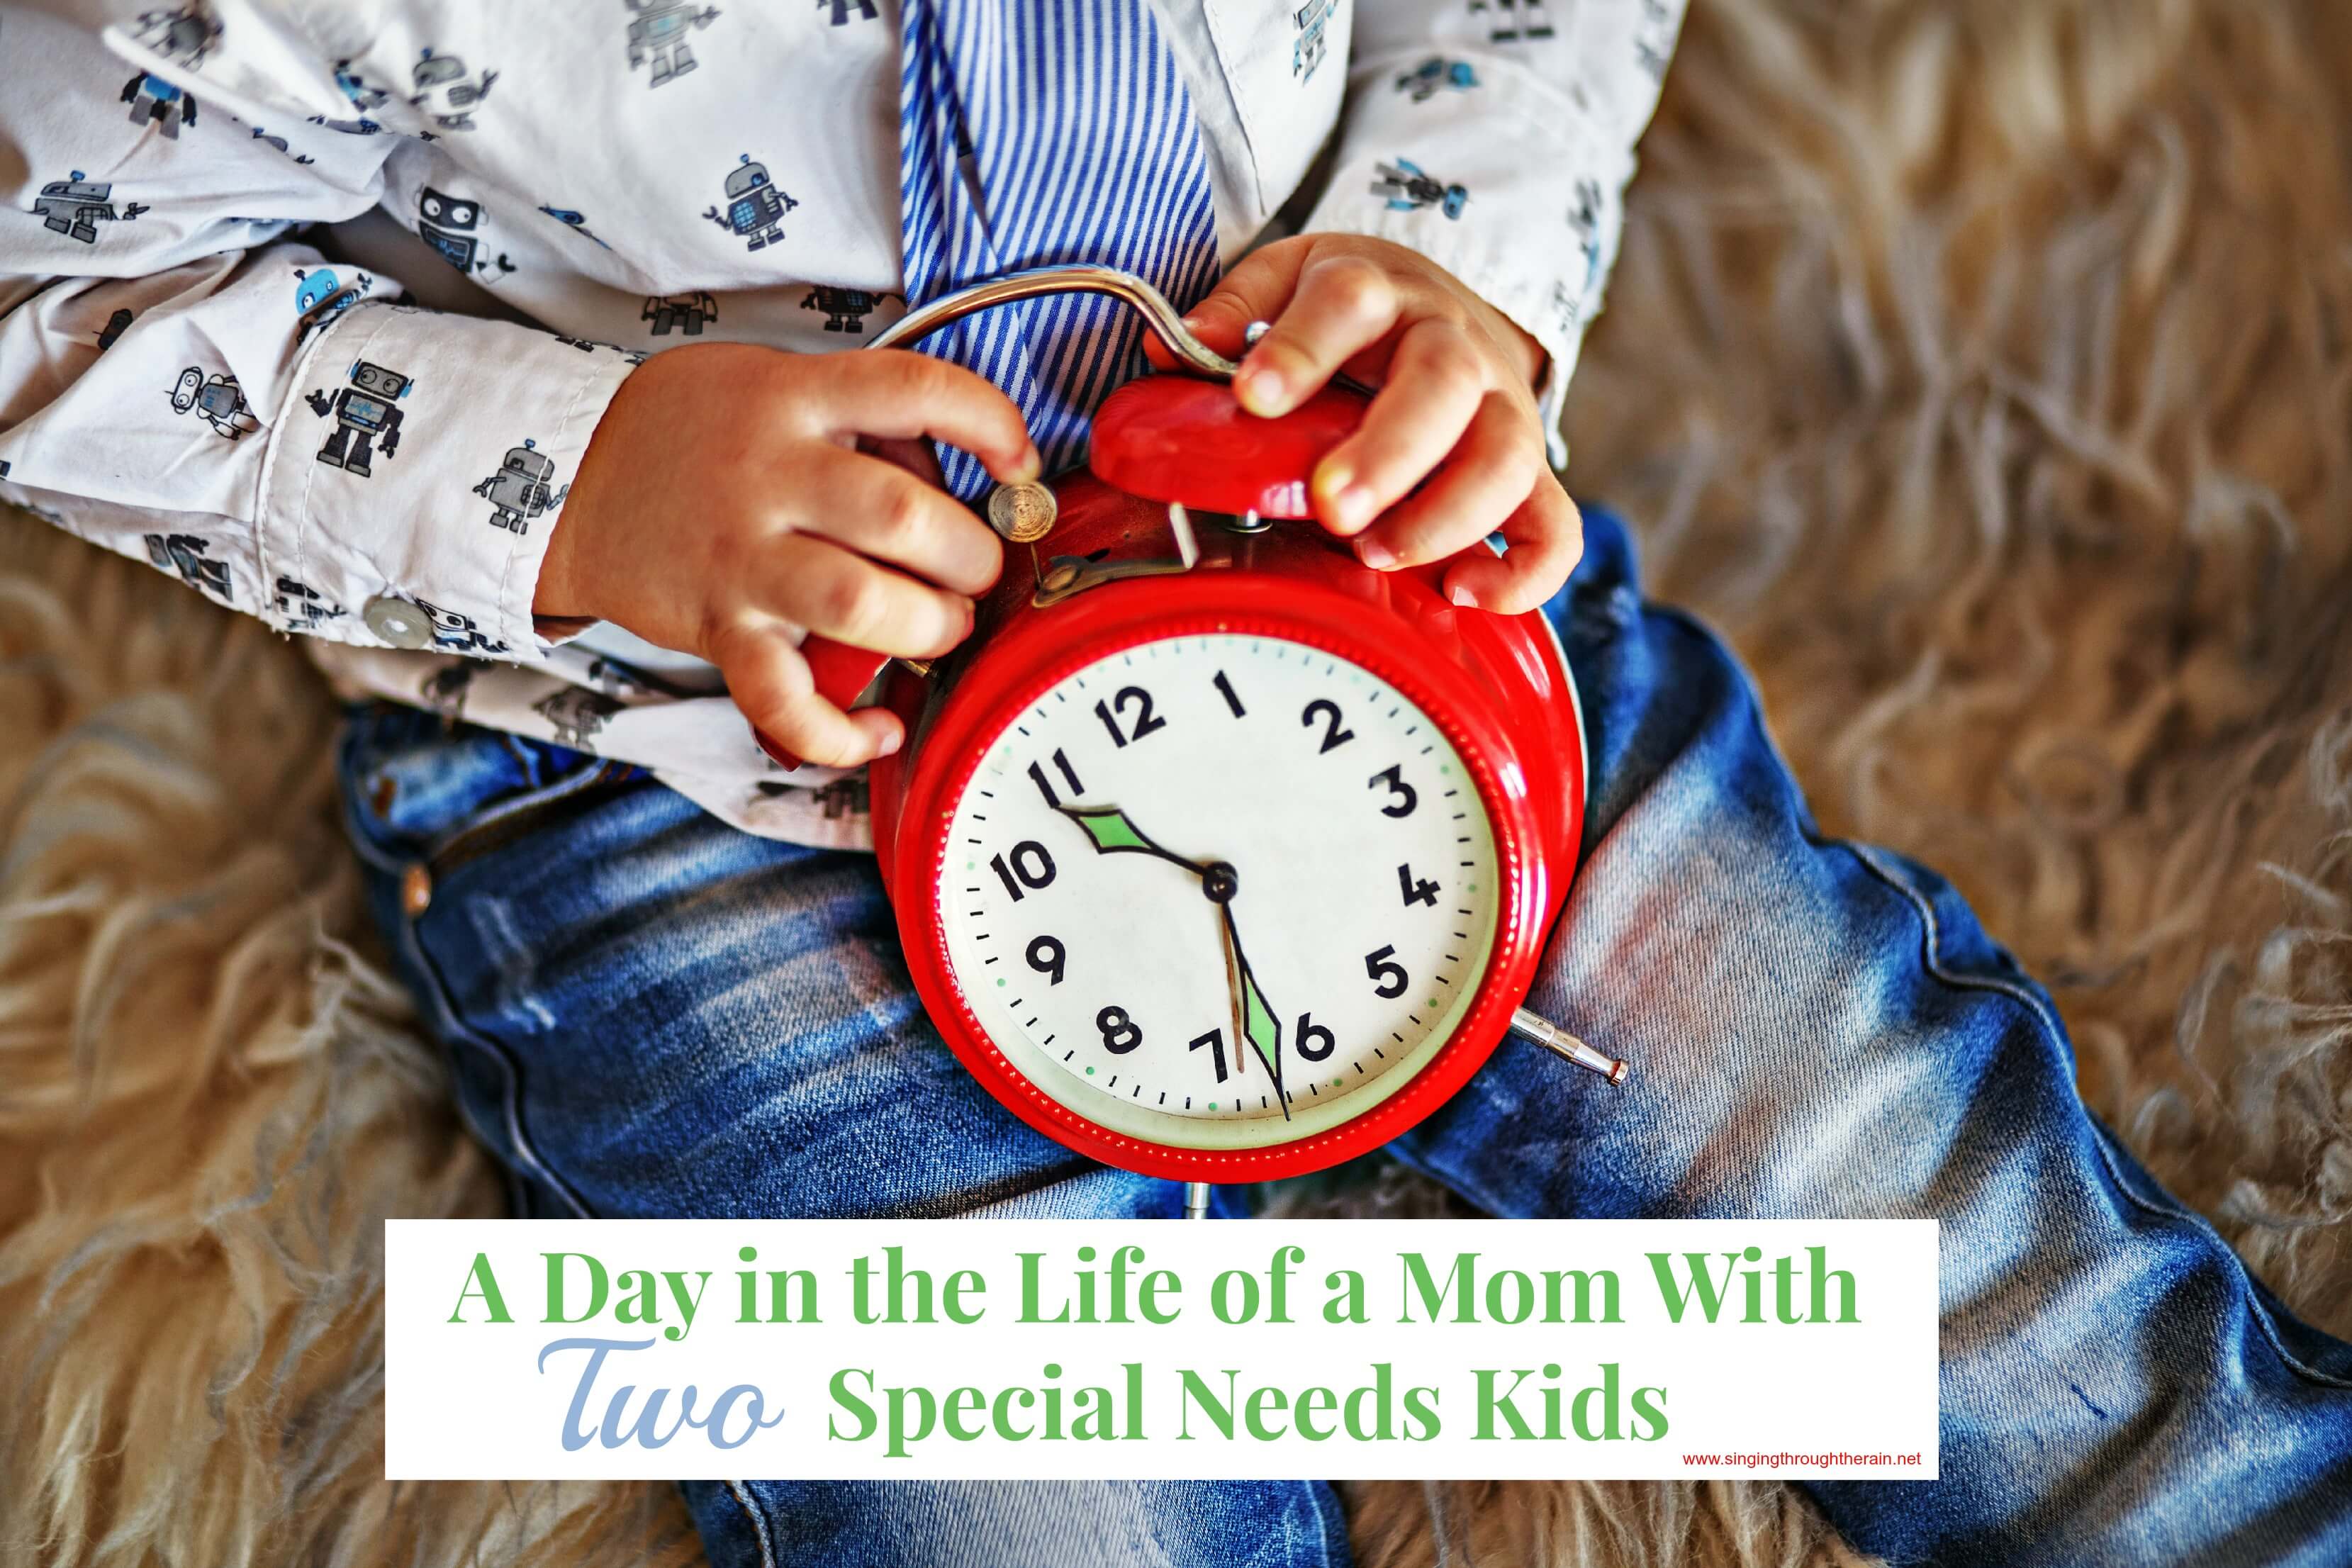 A Day in the Life of a Mom With Two Special Needs Kids